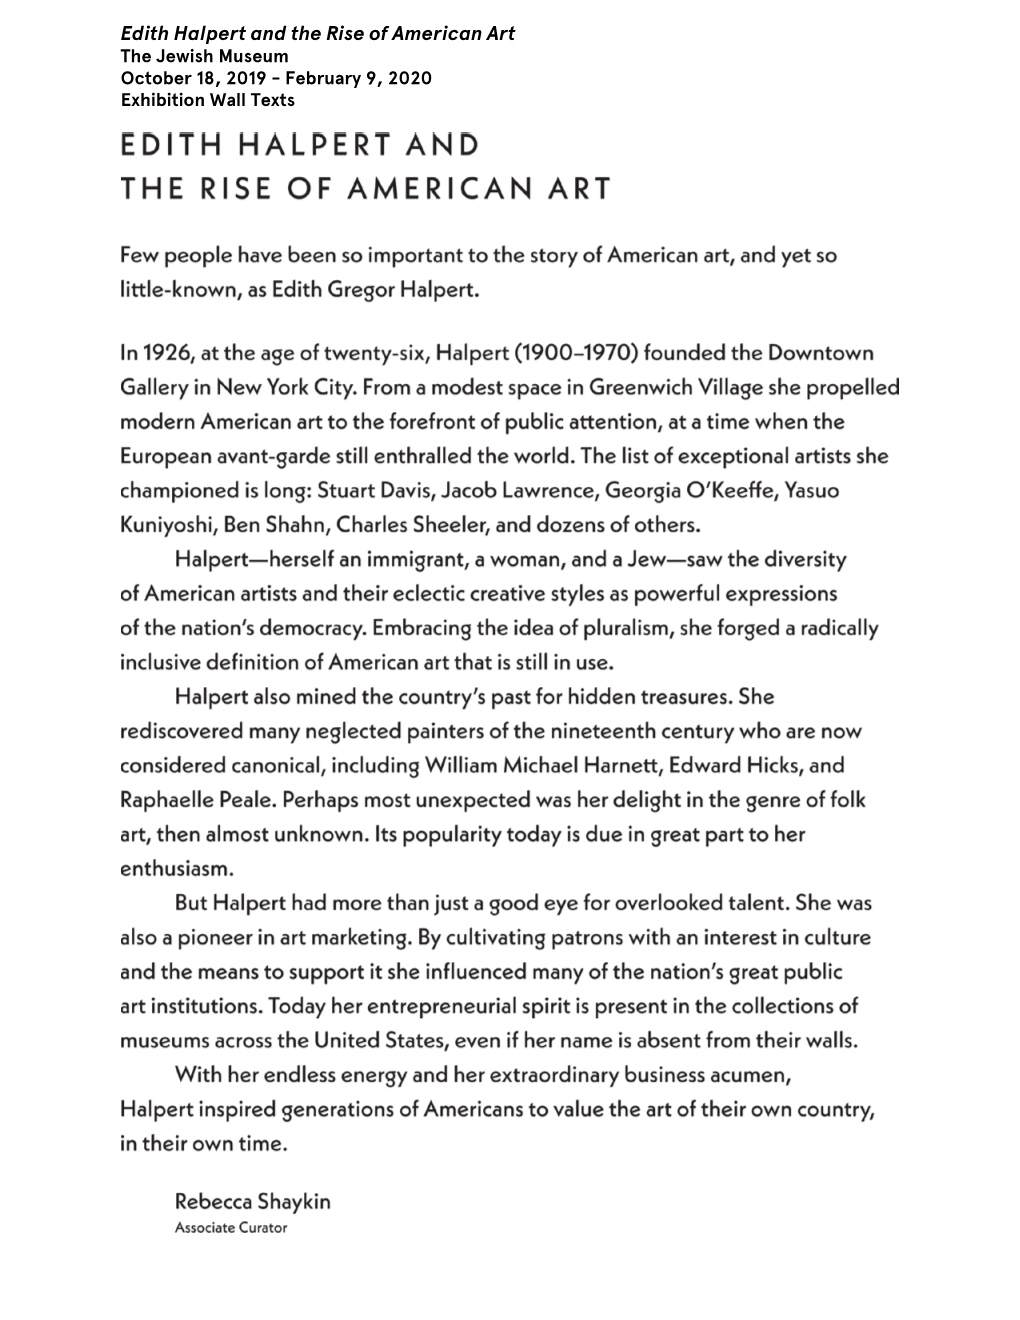 Edith Halpert and the Rise of American Art the Jewish Museum October 18, 2019 - February 9, 2020 Exhibition Wall Texts